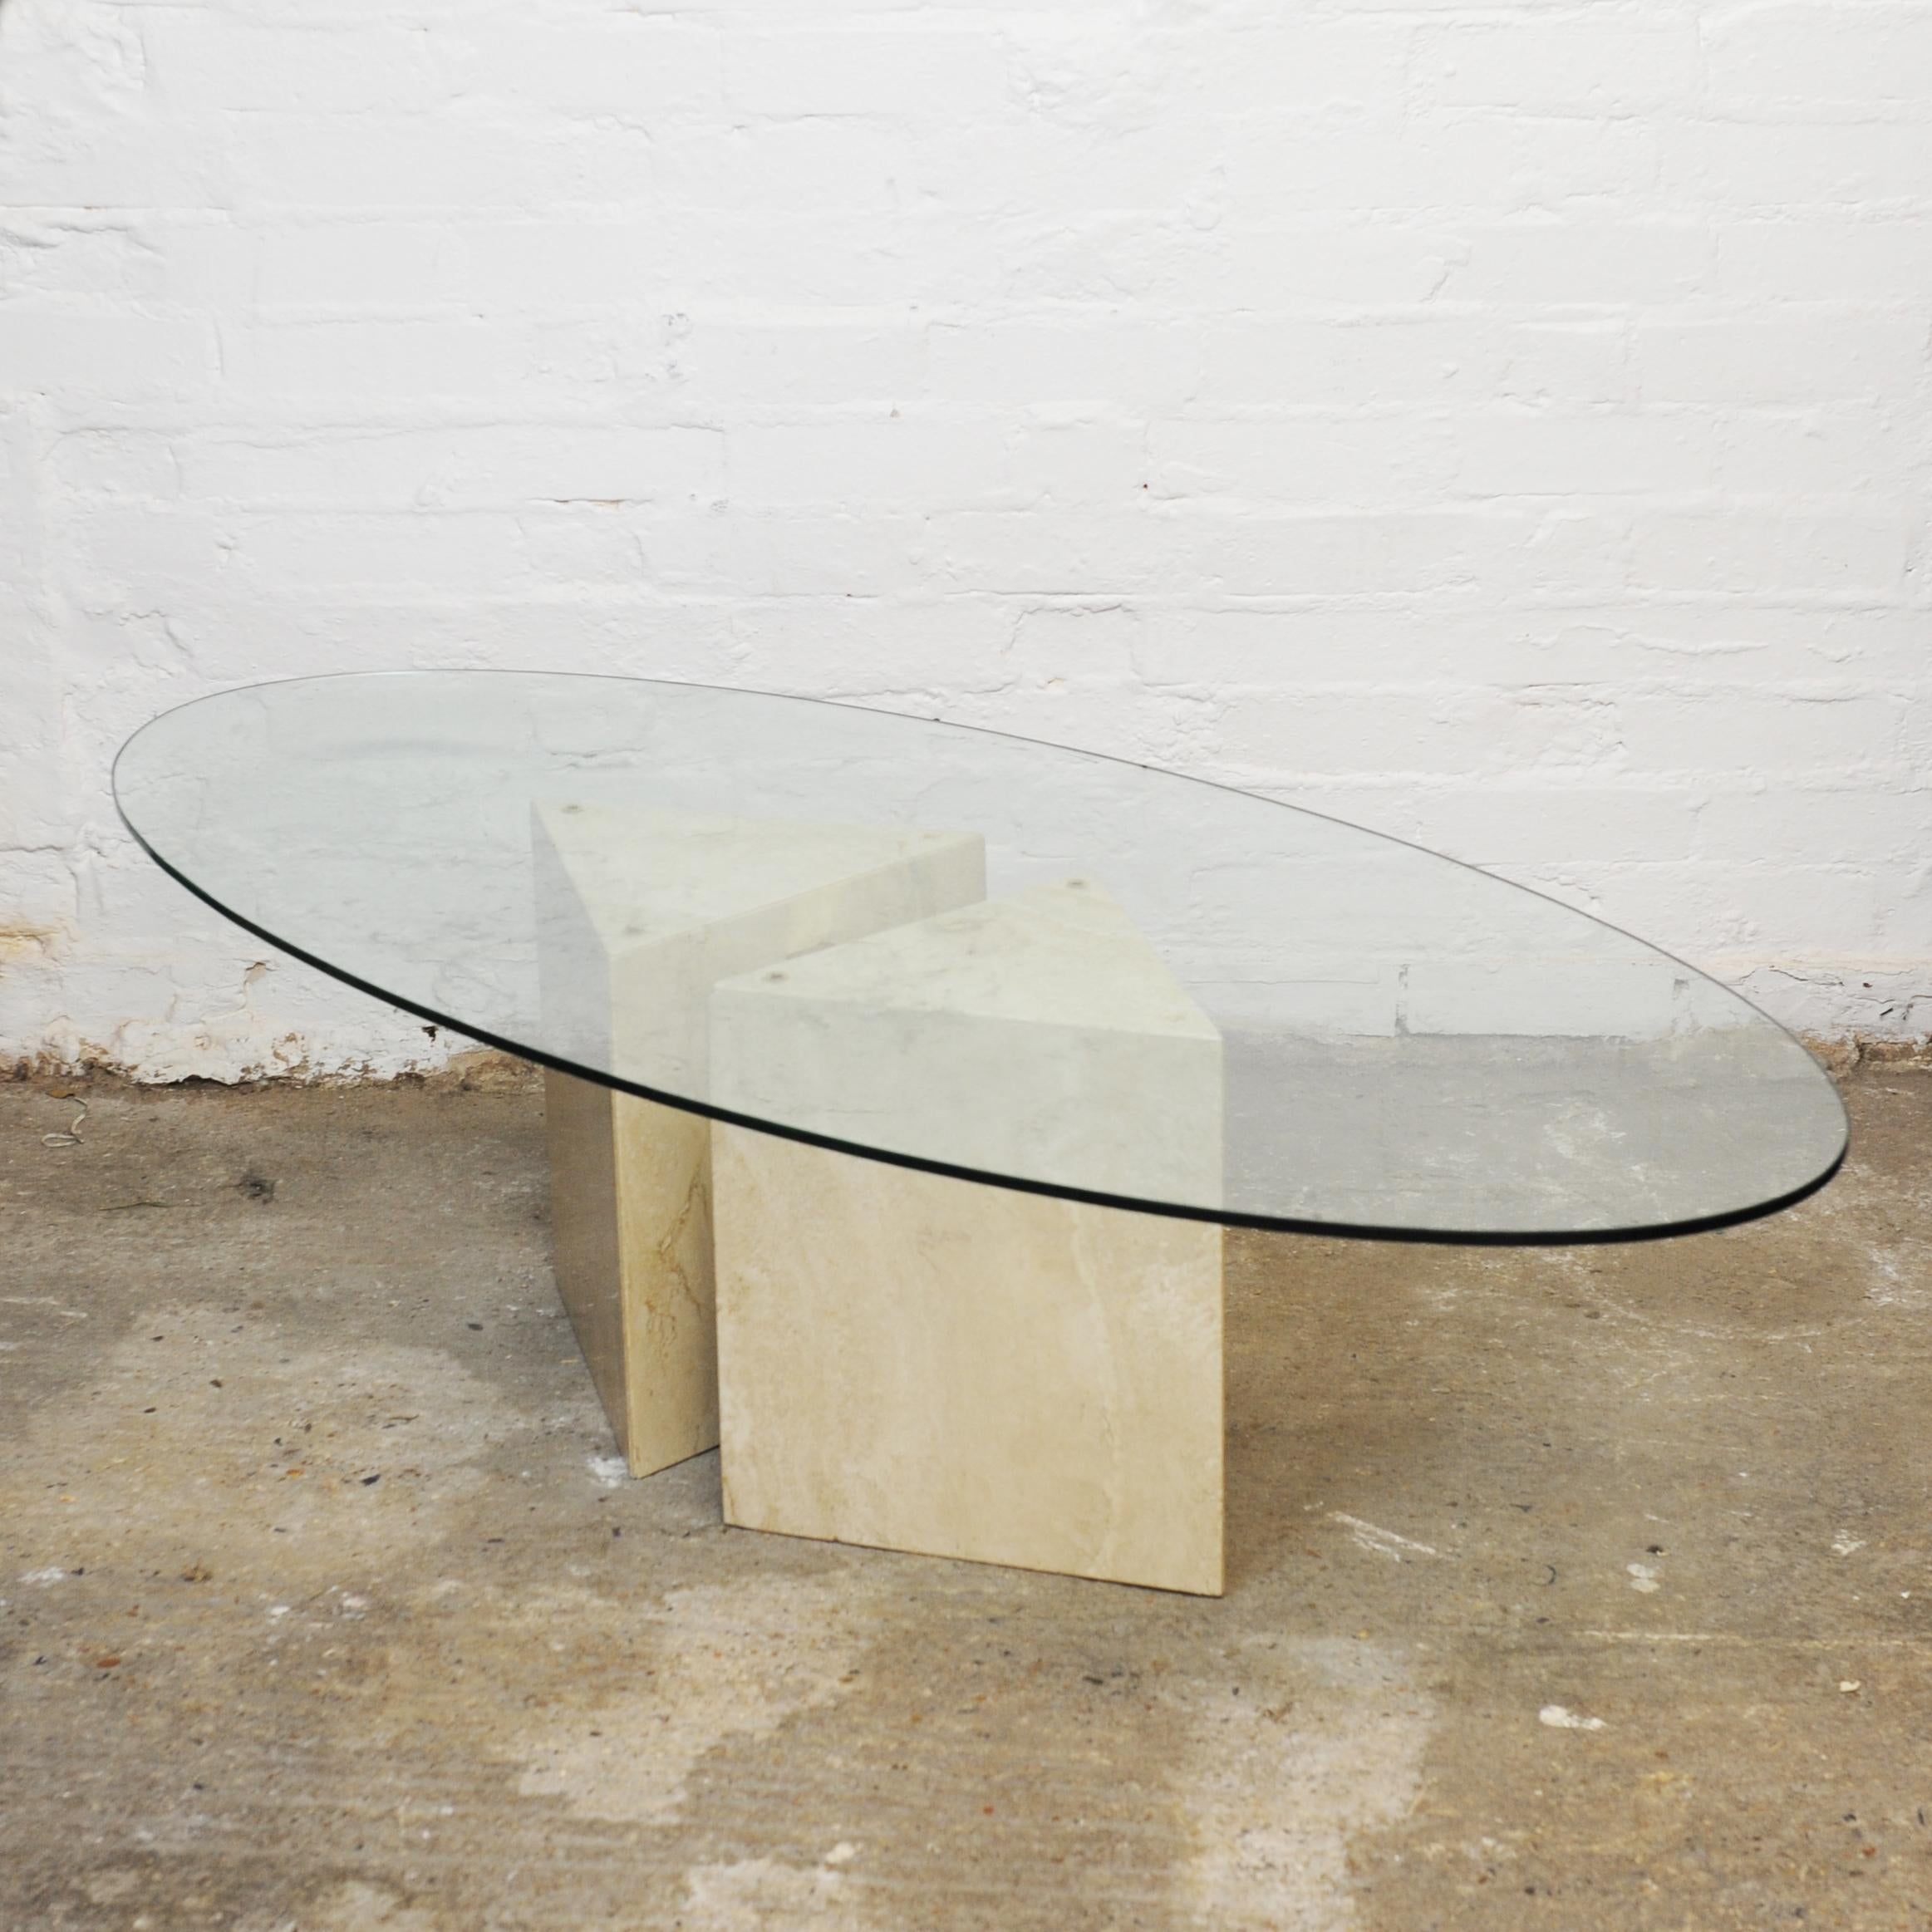 A post modern glass oval topped coffee table on two triangular bases joined by a brass piece. 

Designer - Unknown

Design Period - 1980 to 1989

Detailed Condition - Good with minimal defects. There is a chip on the travertine corner which is